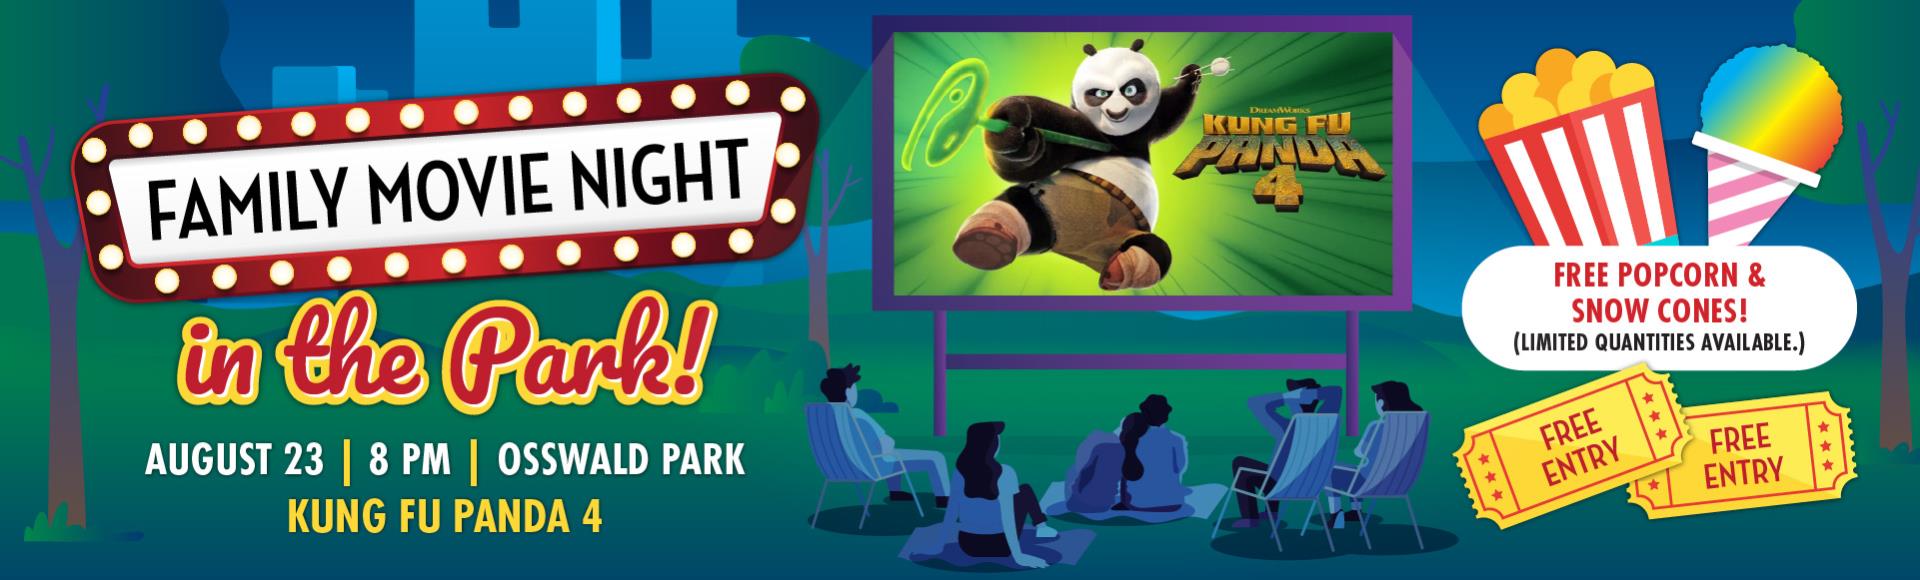 Family Movie Night in the Park. May 24, 8 PM, Shirley Small Park. Trolls Band Together. Free popcorn and snow cones. Limited quantities available. Free entry. 